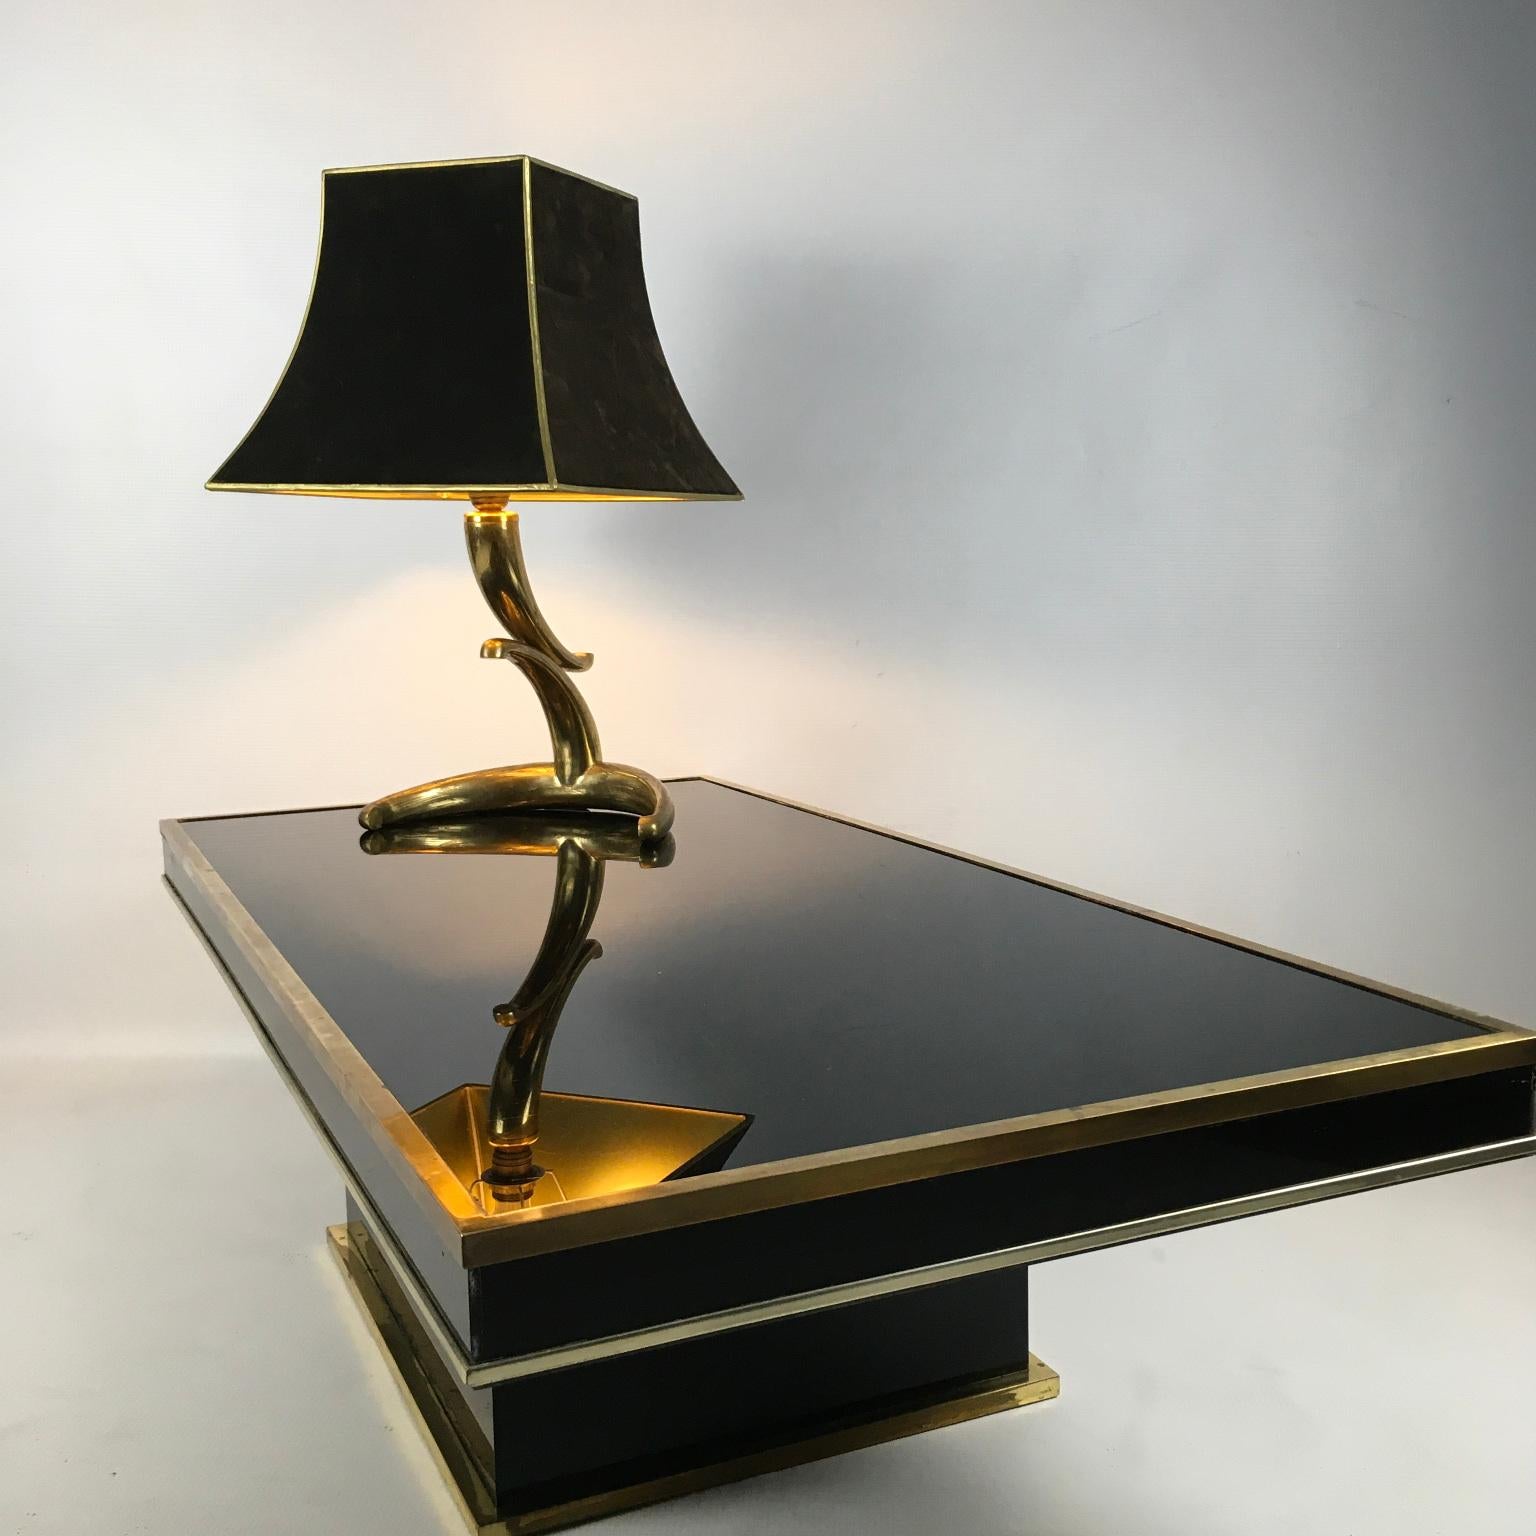 1970s Table Lamp in Solid Brass Horns Shape with Velvet Lampshade, France For Sale 2